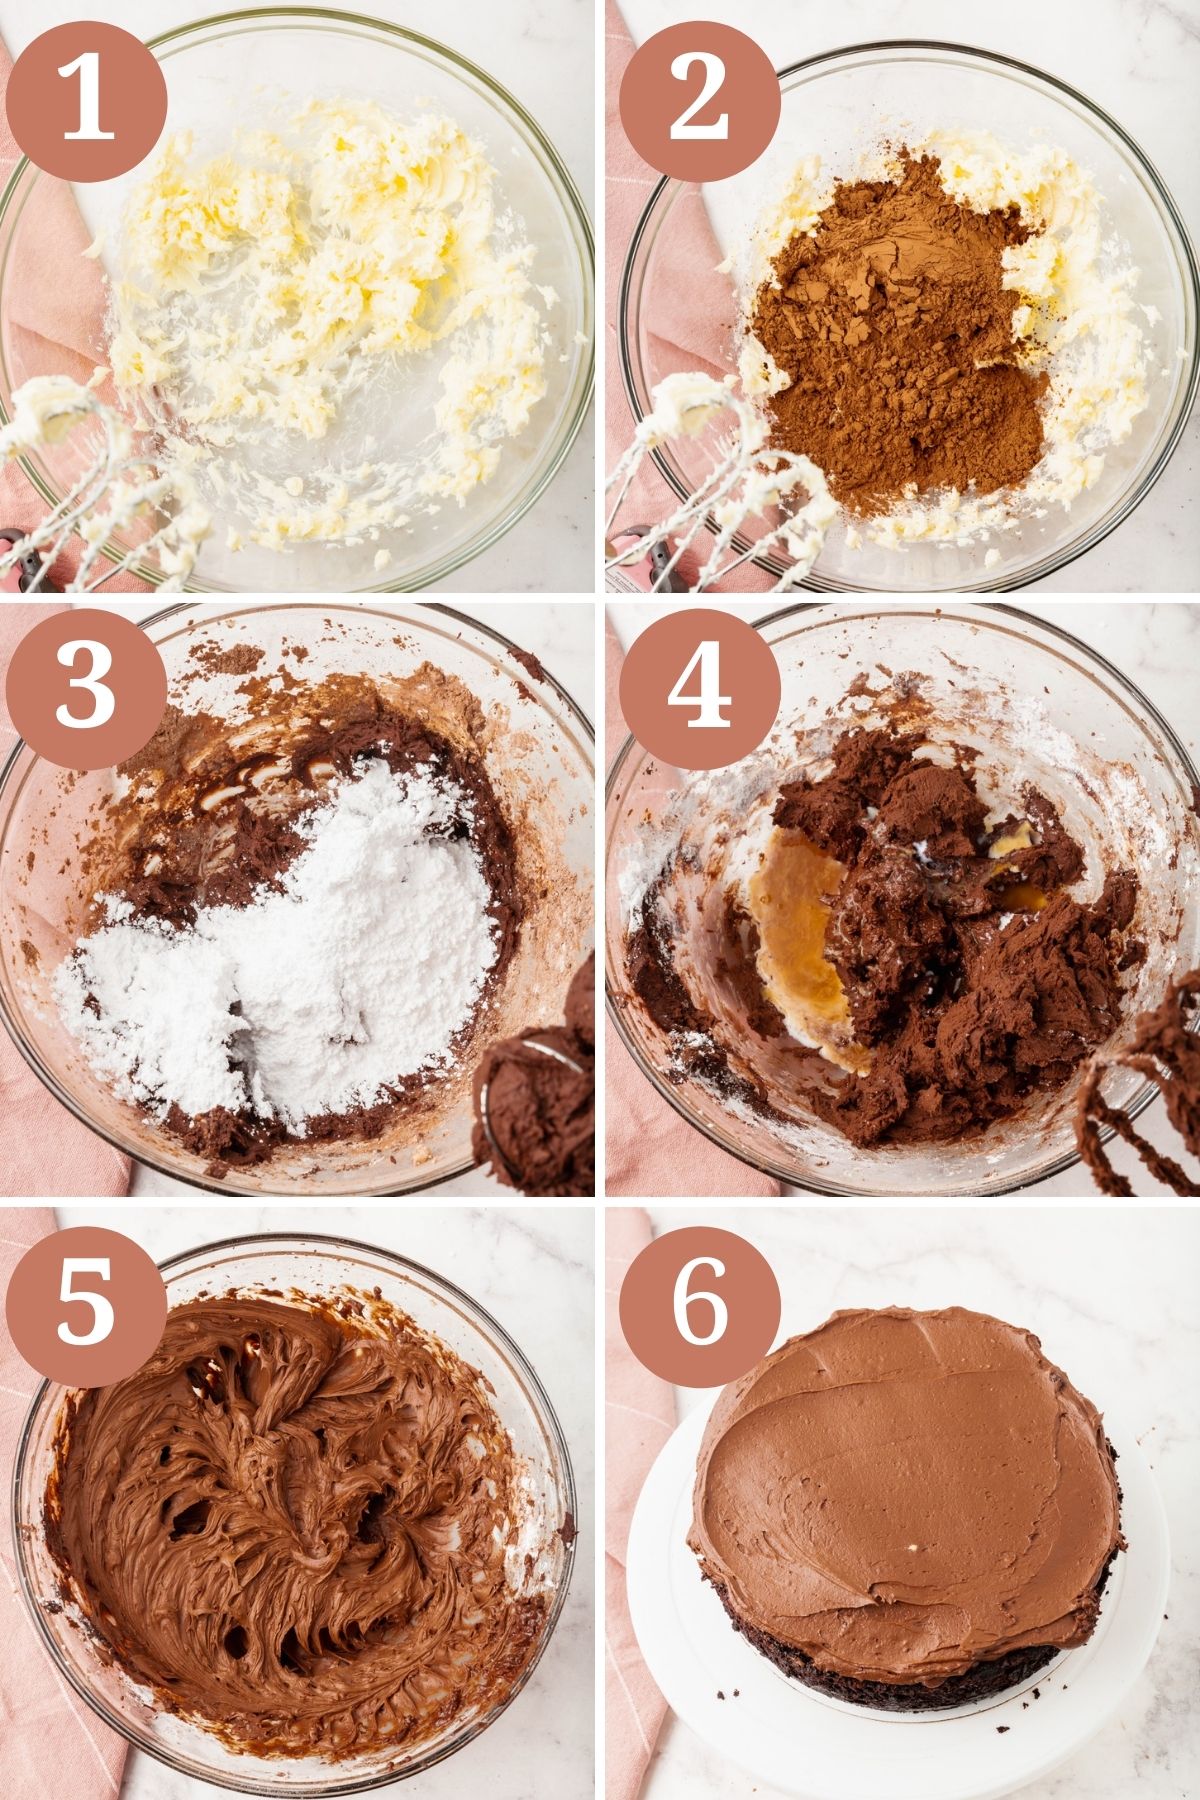 Steps for making gluten-free chocolate cake chocolate frosting.